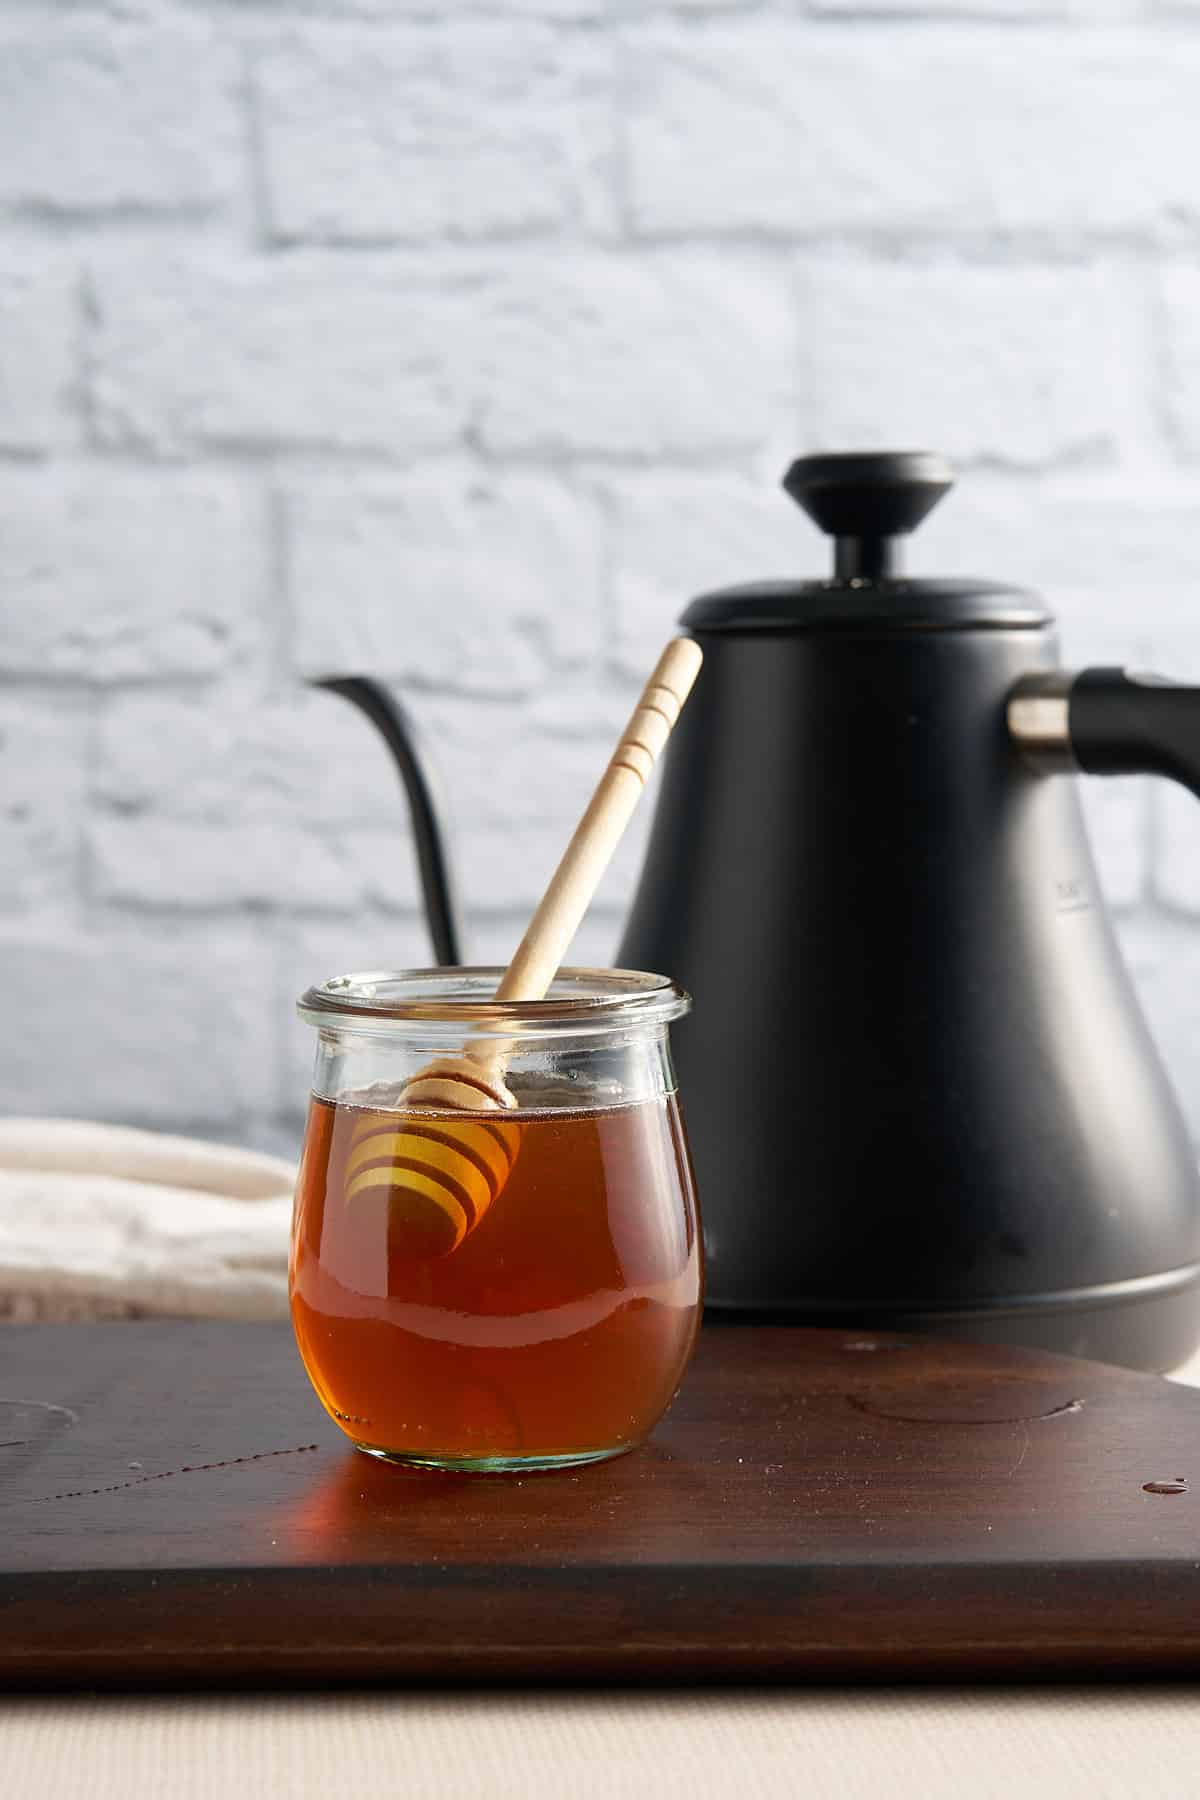 honey syrup in conatiner with hot water kettle behind it